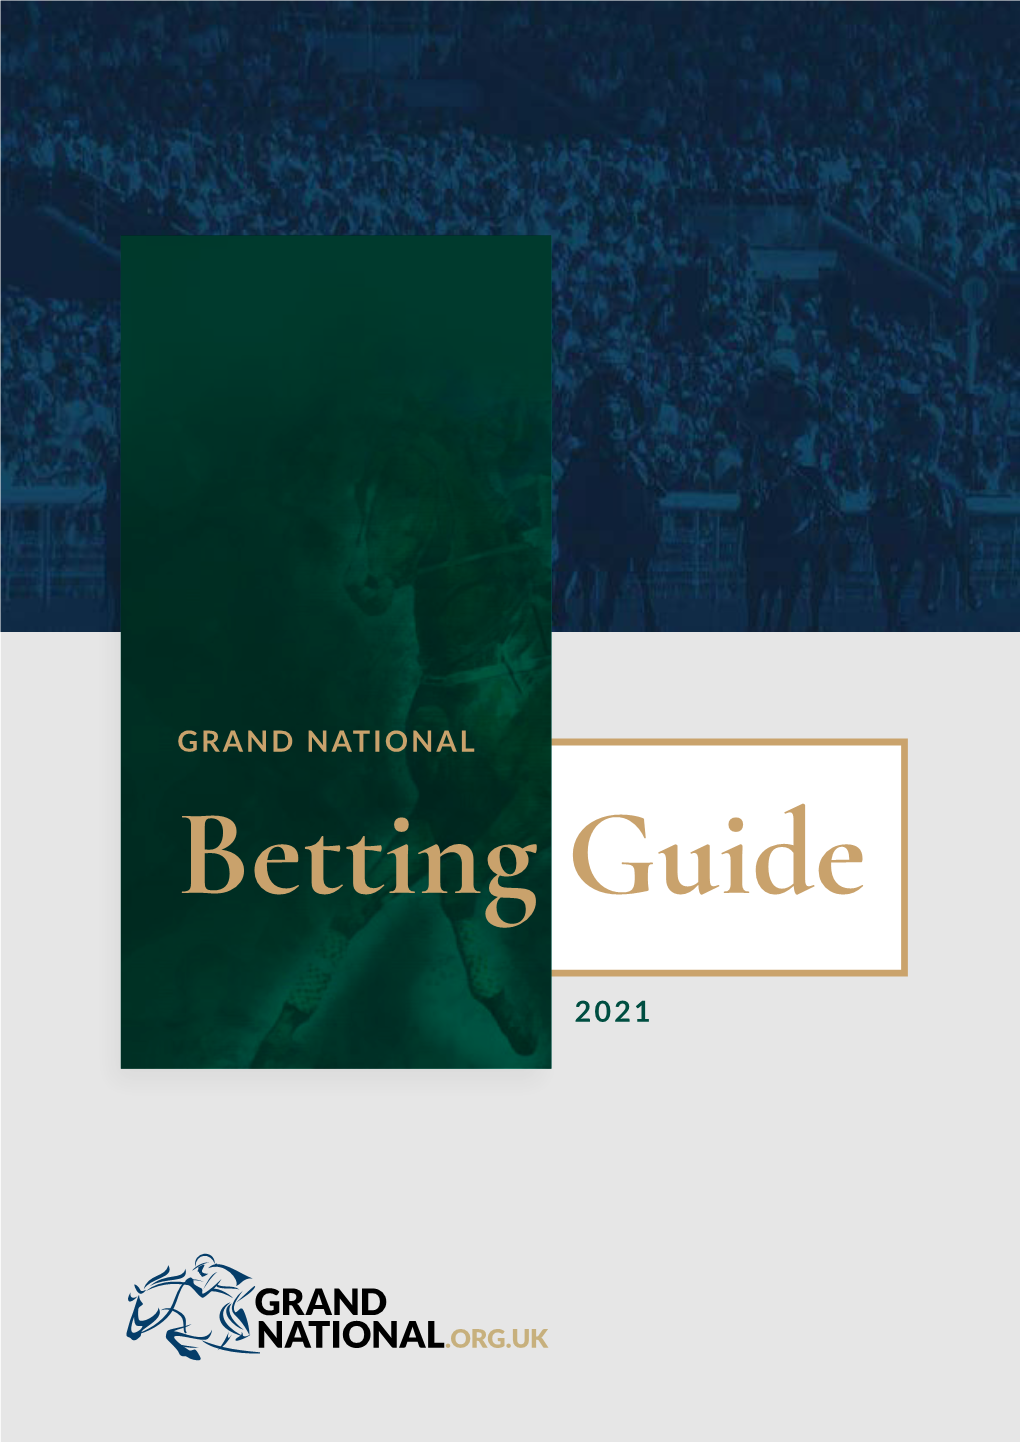 Download Our Grand National Betting Guide